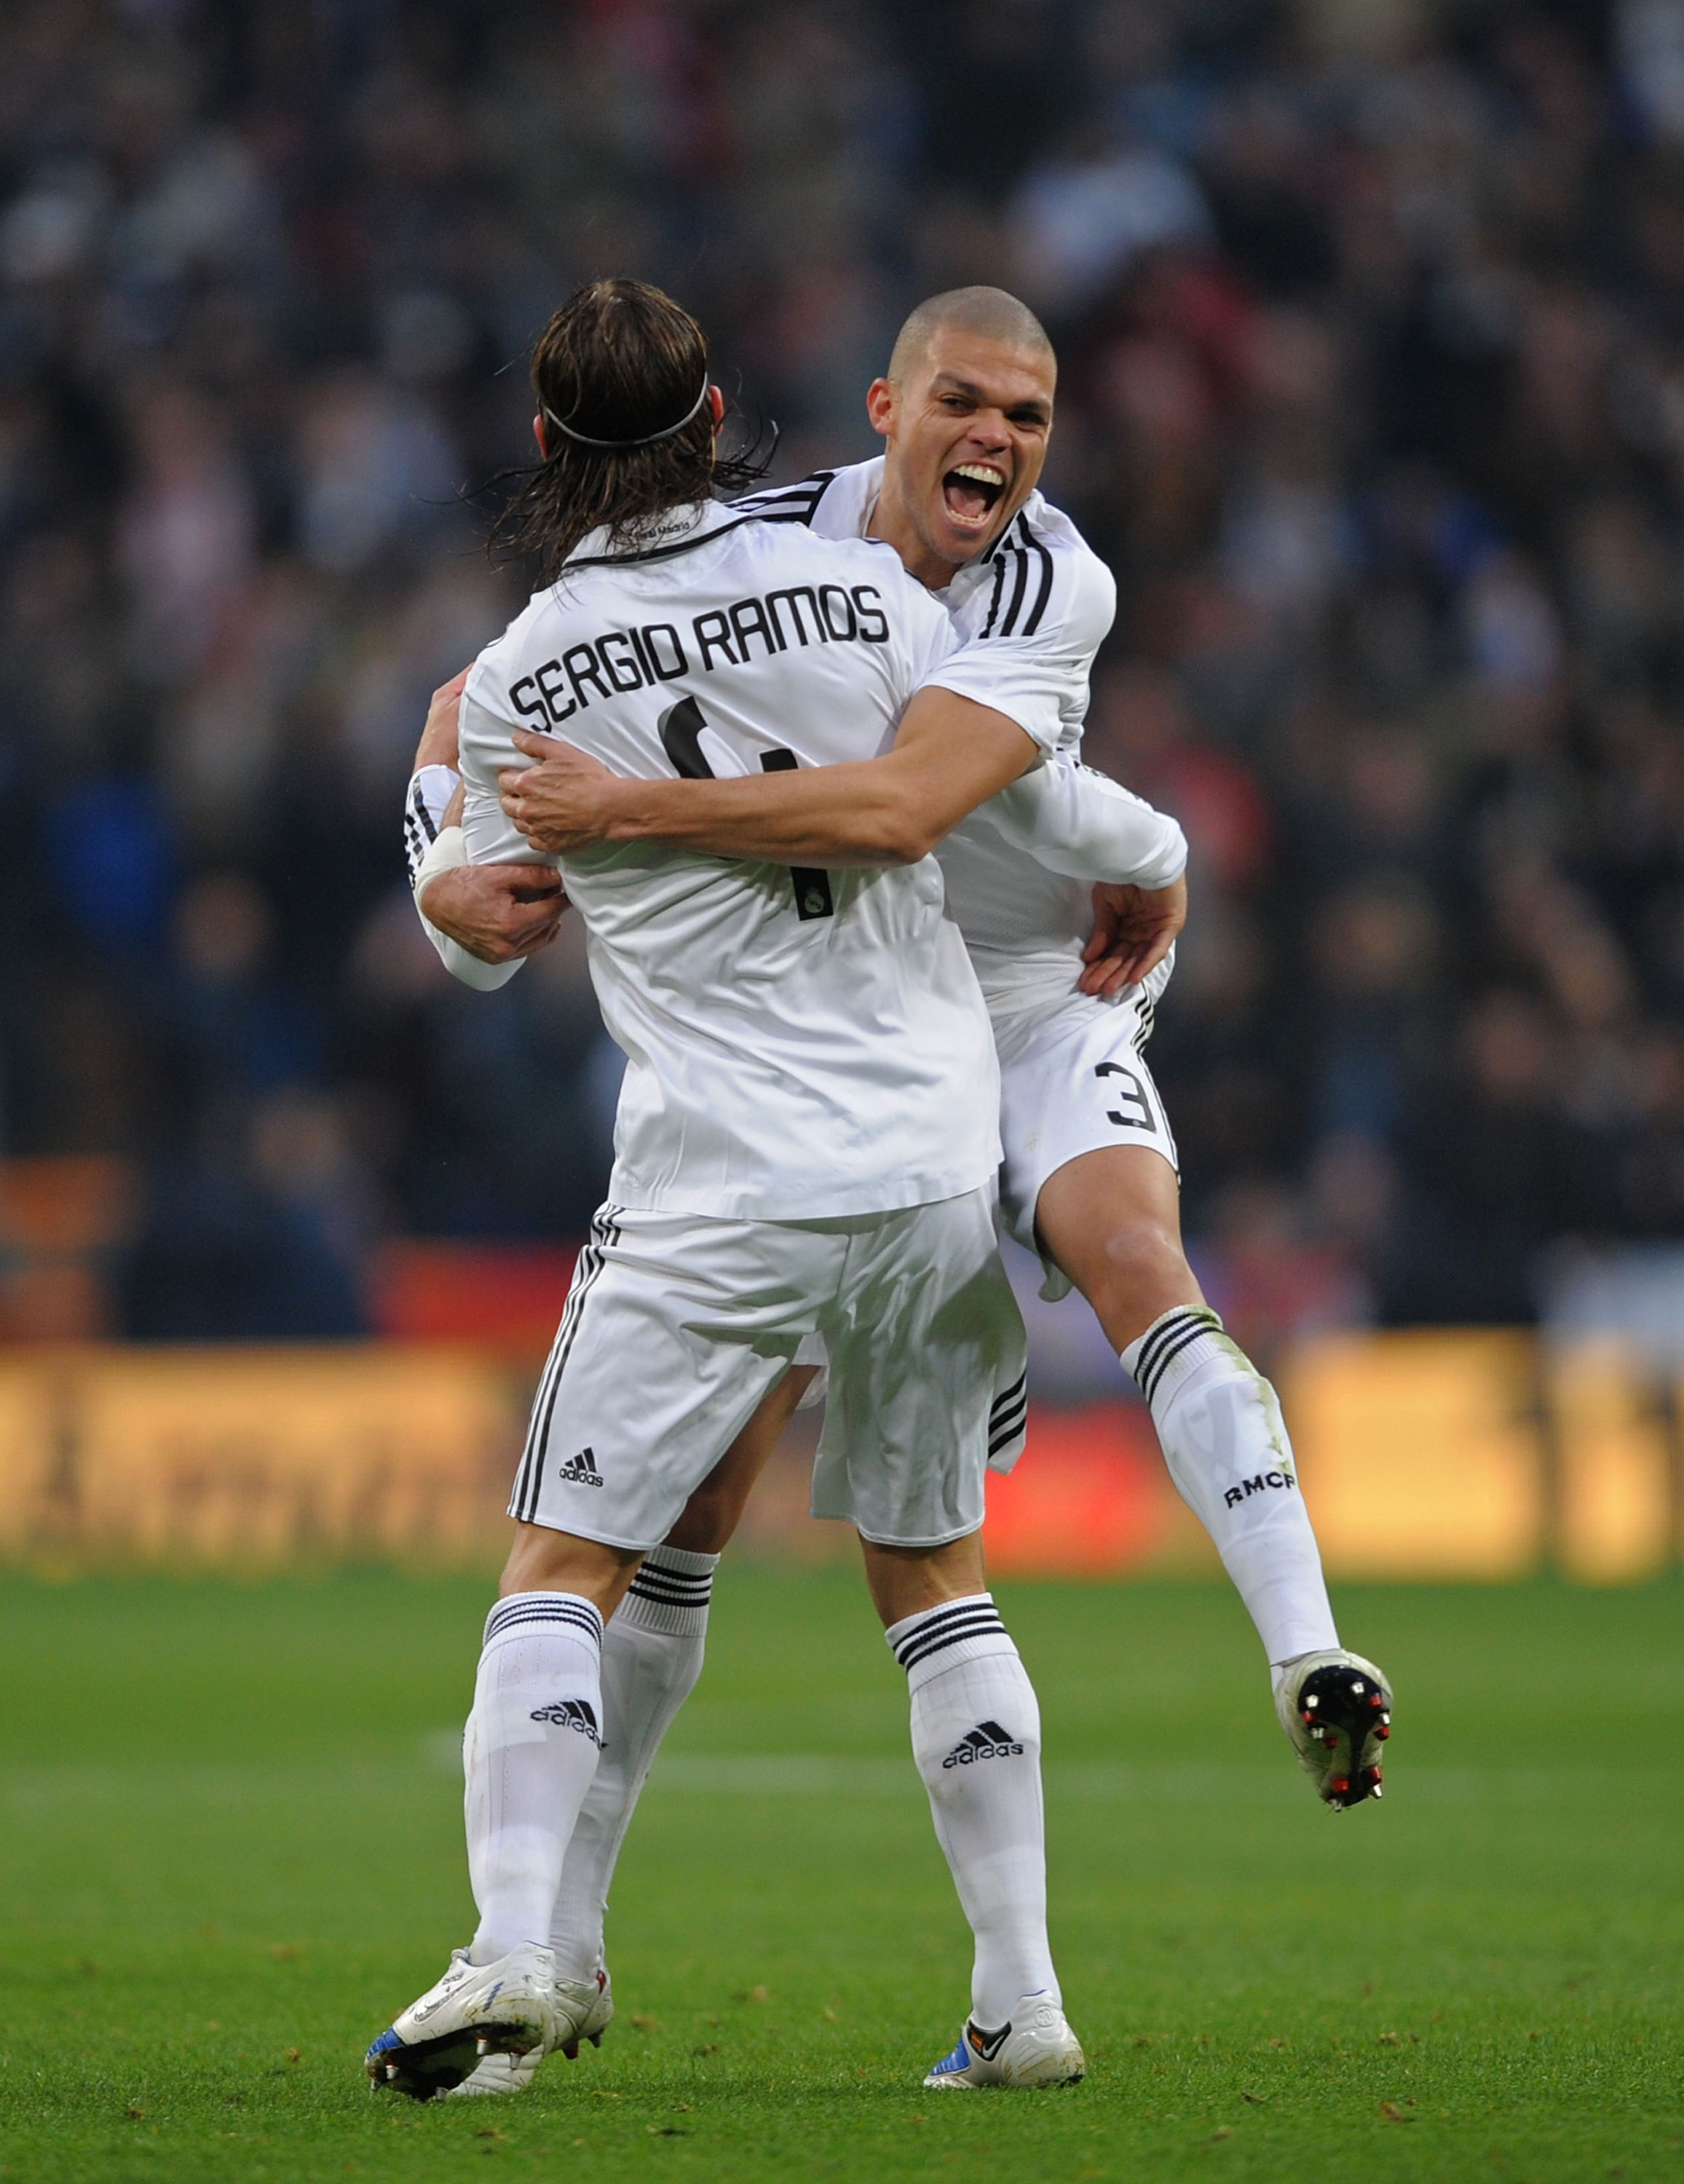 MADRID, SPAIN - JANUARY 18:  Sergio Ramos of Real Madrid celebrates with Pepe after scoring Real's first goal against Osasuna during the La Liga match between Real Madrid and Osasuna on January 18, 2009 in Madrid, Spain.  (Photo by Denis Doyle/Getty Image